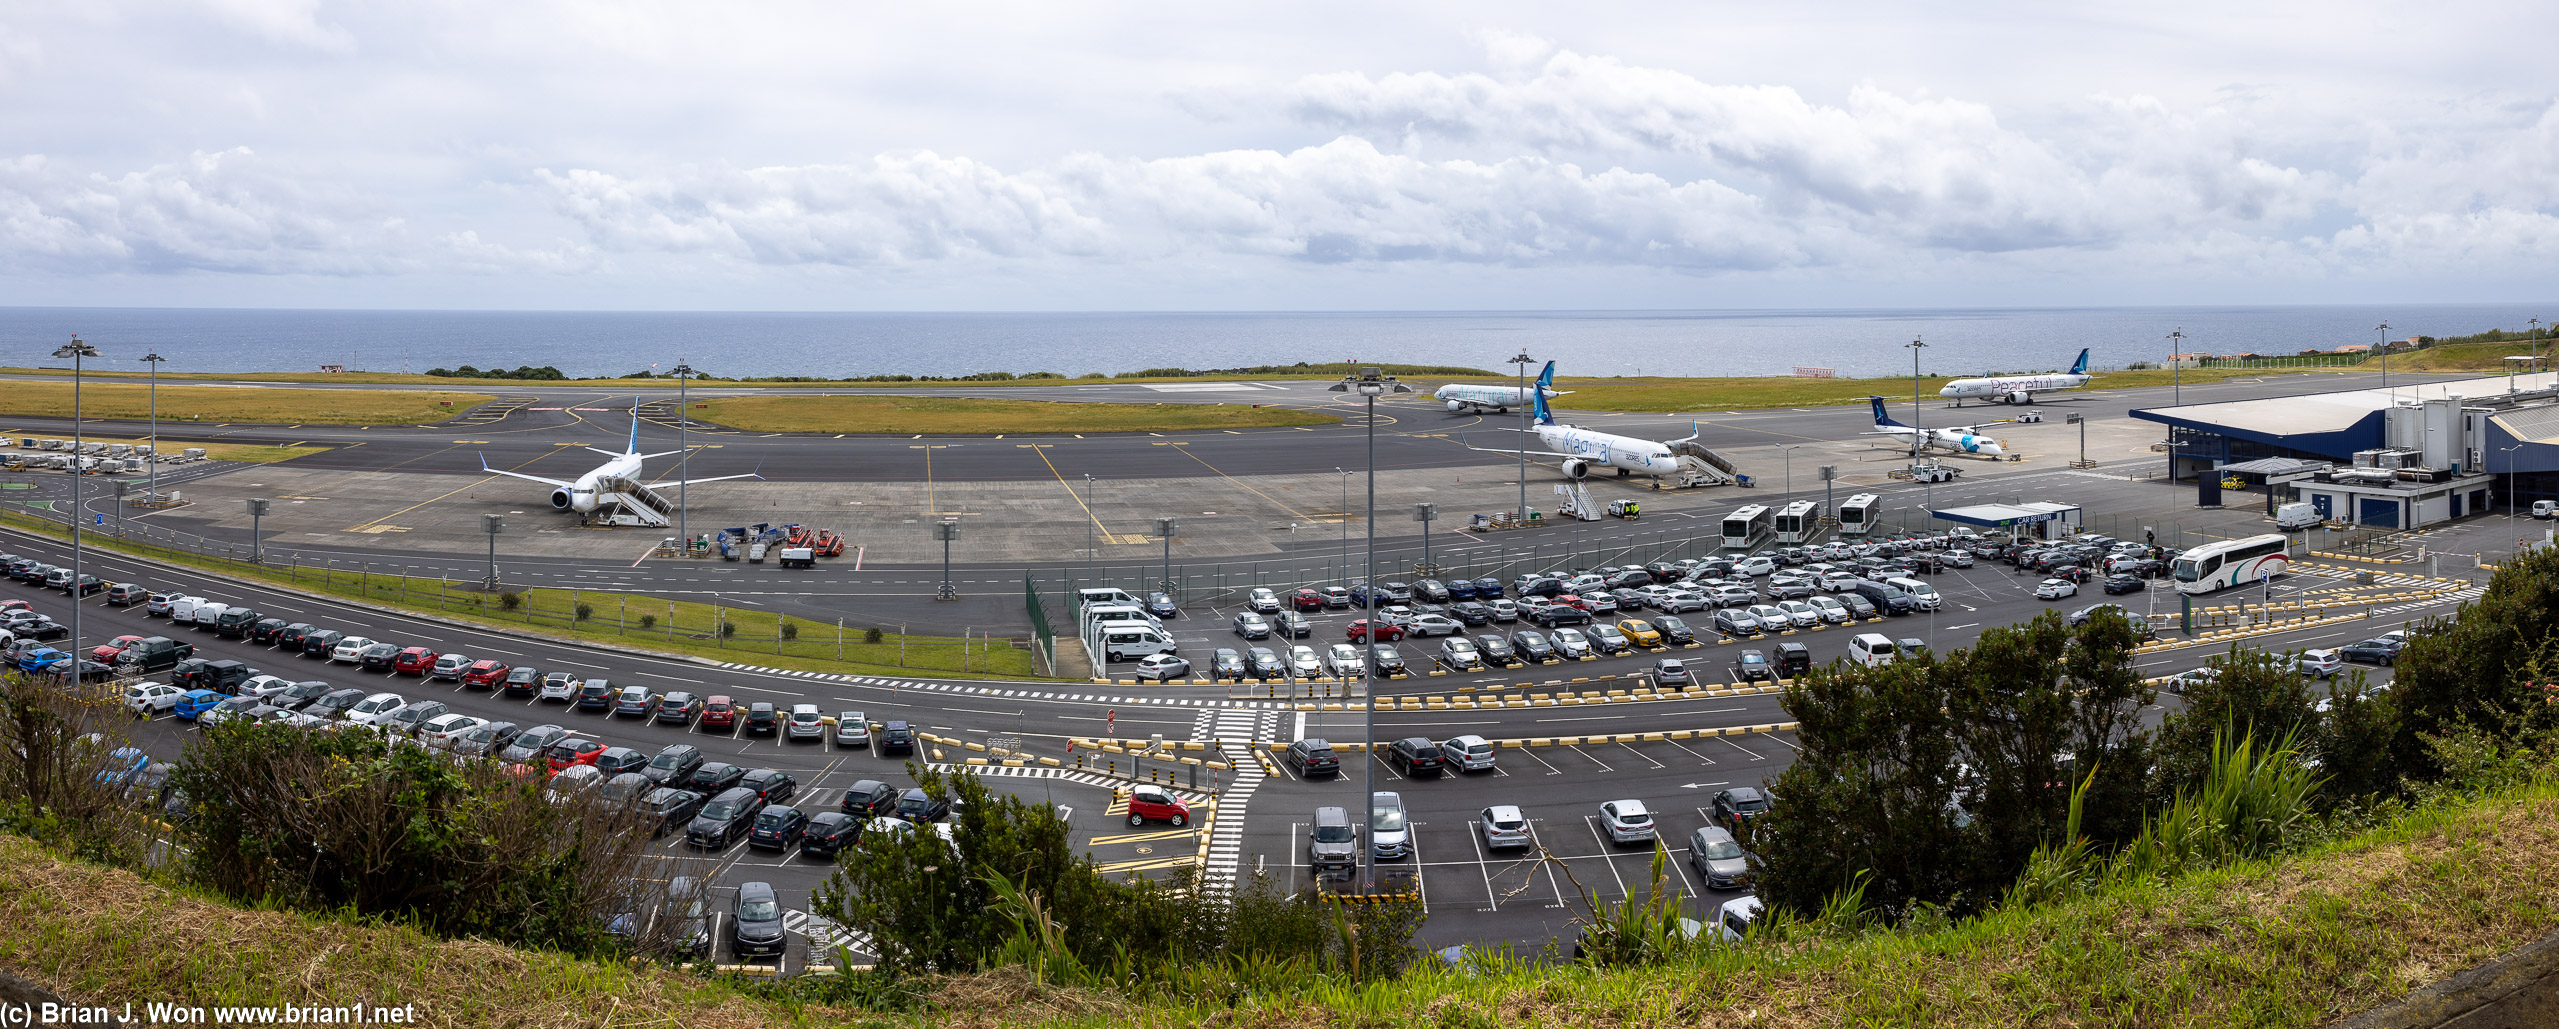 Great view of a busy airport.